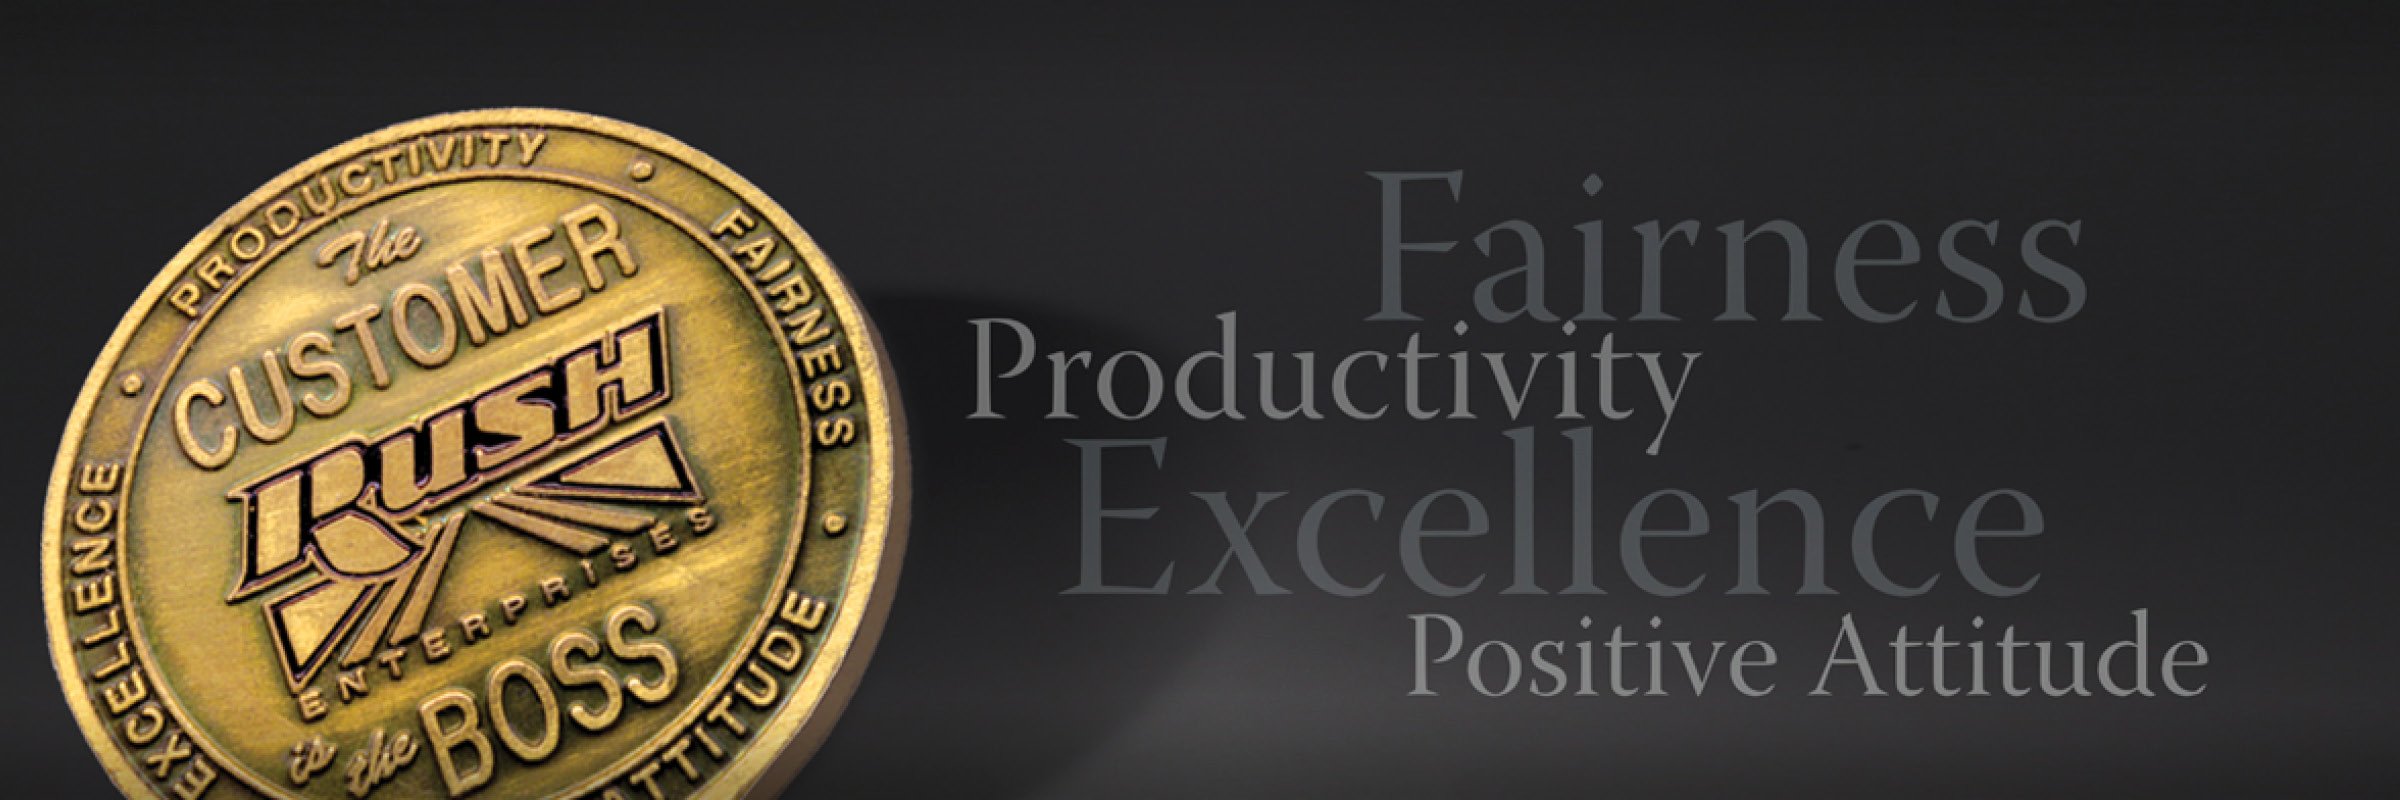 Rush Truck Centers coin with the words Fairness, Productivity, Excellence and Positive Attitude to the right